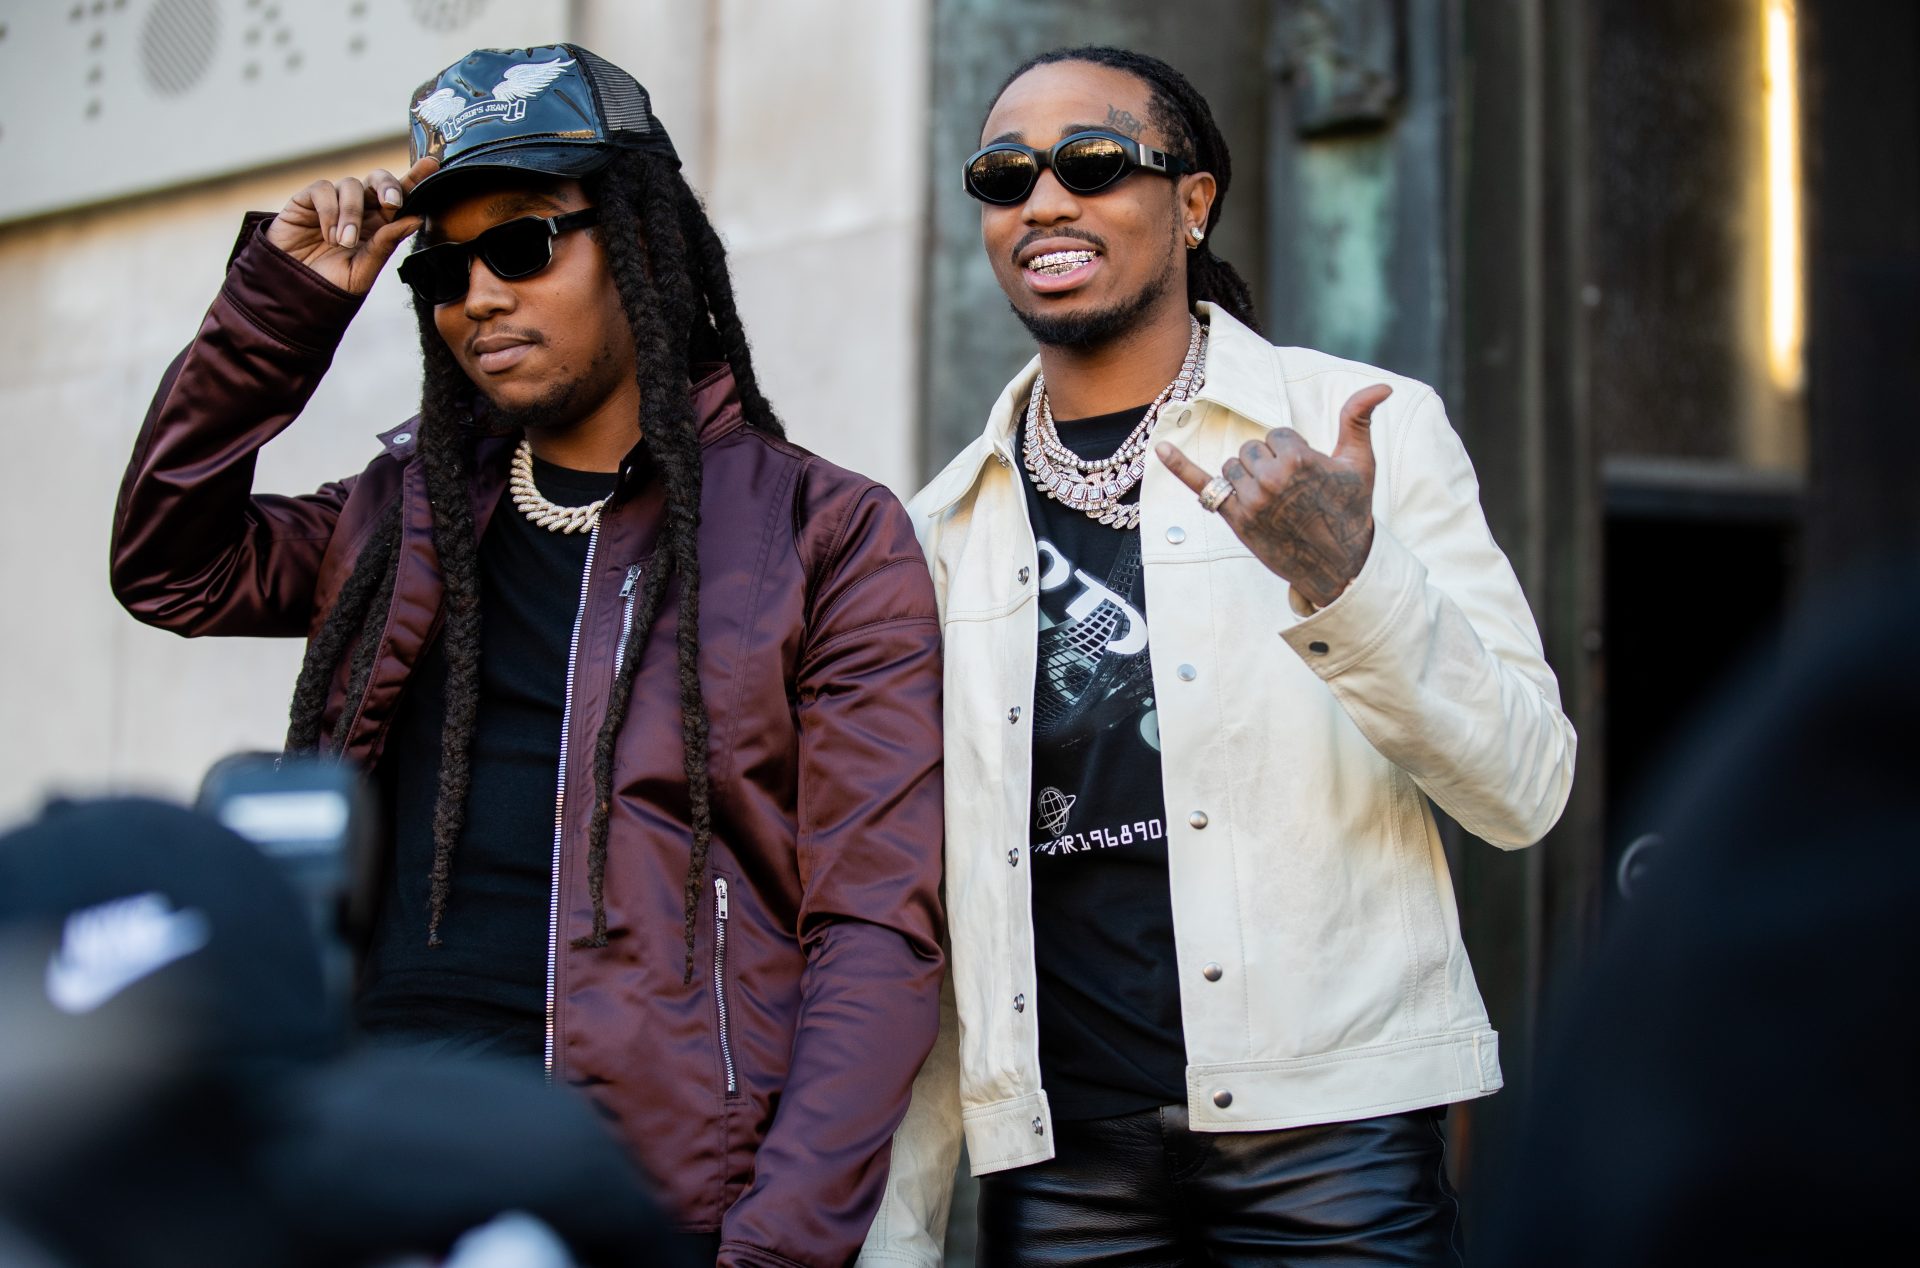 LISTEN: Quavo Grieves Nephew Takeoff In New Song: 'Ion Kno If I'm The Same Without You'